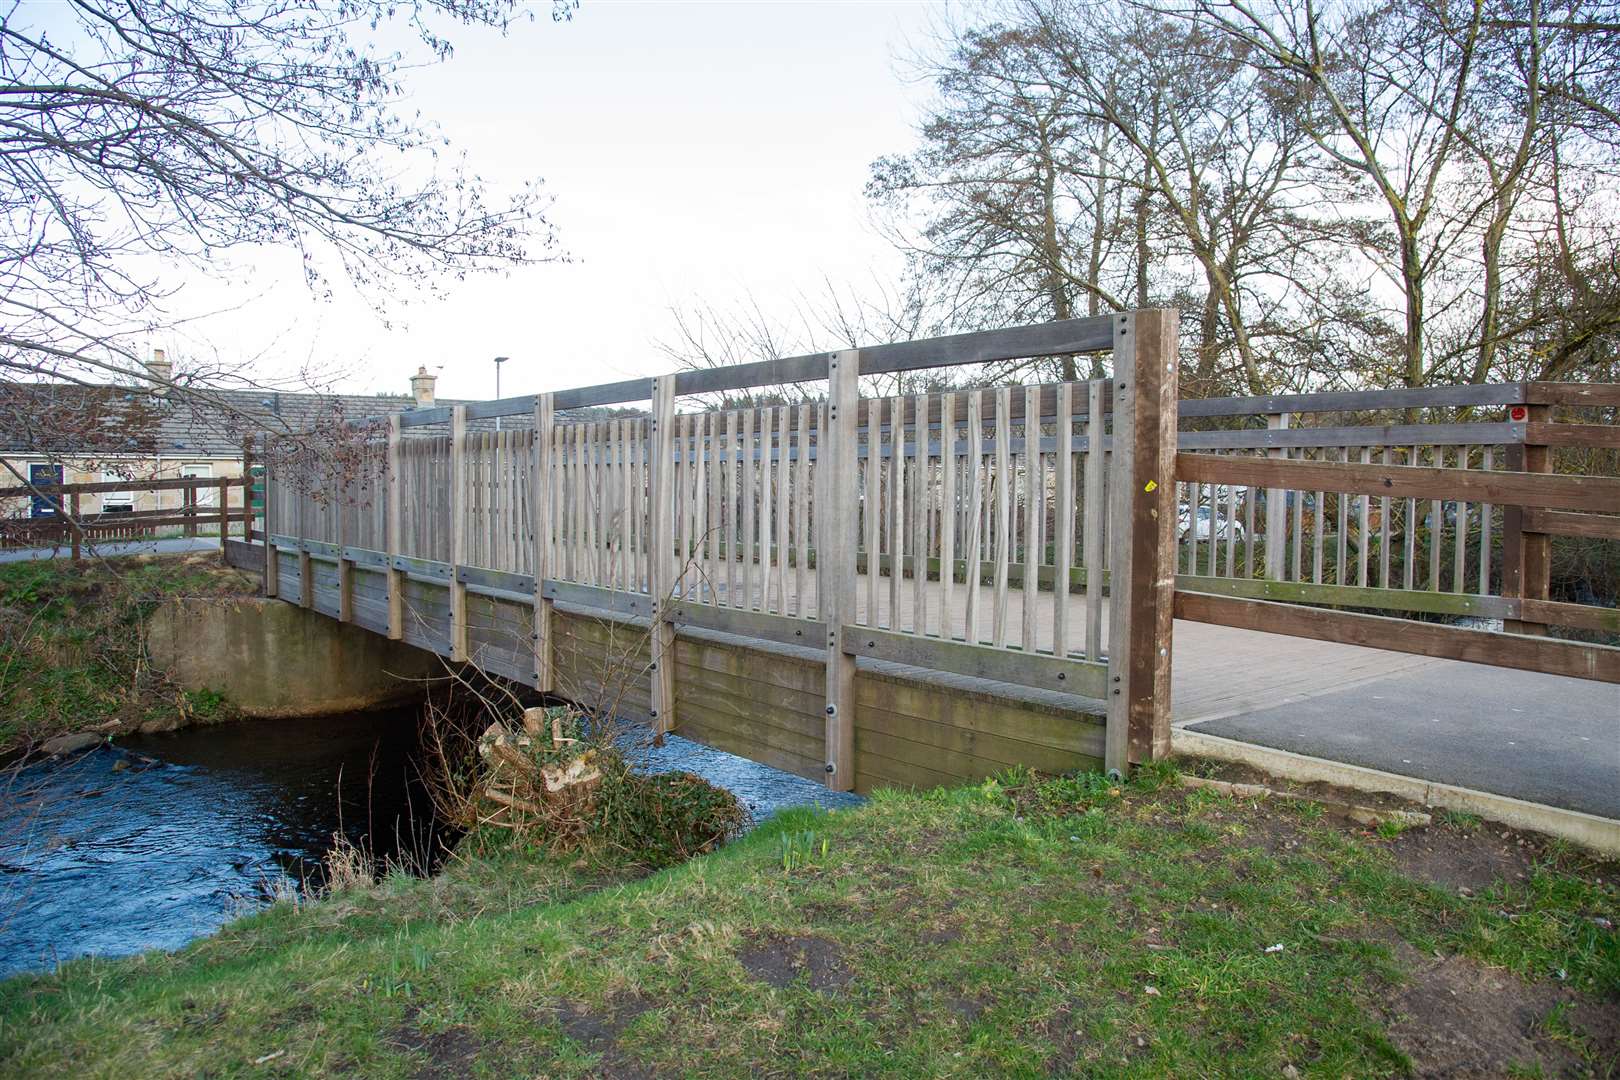 The bridge at Fleurs is set to be at the centre of a revamped cycle path through the town.